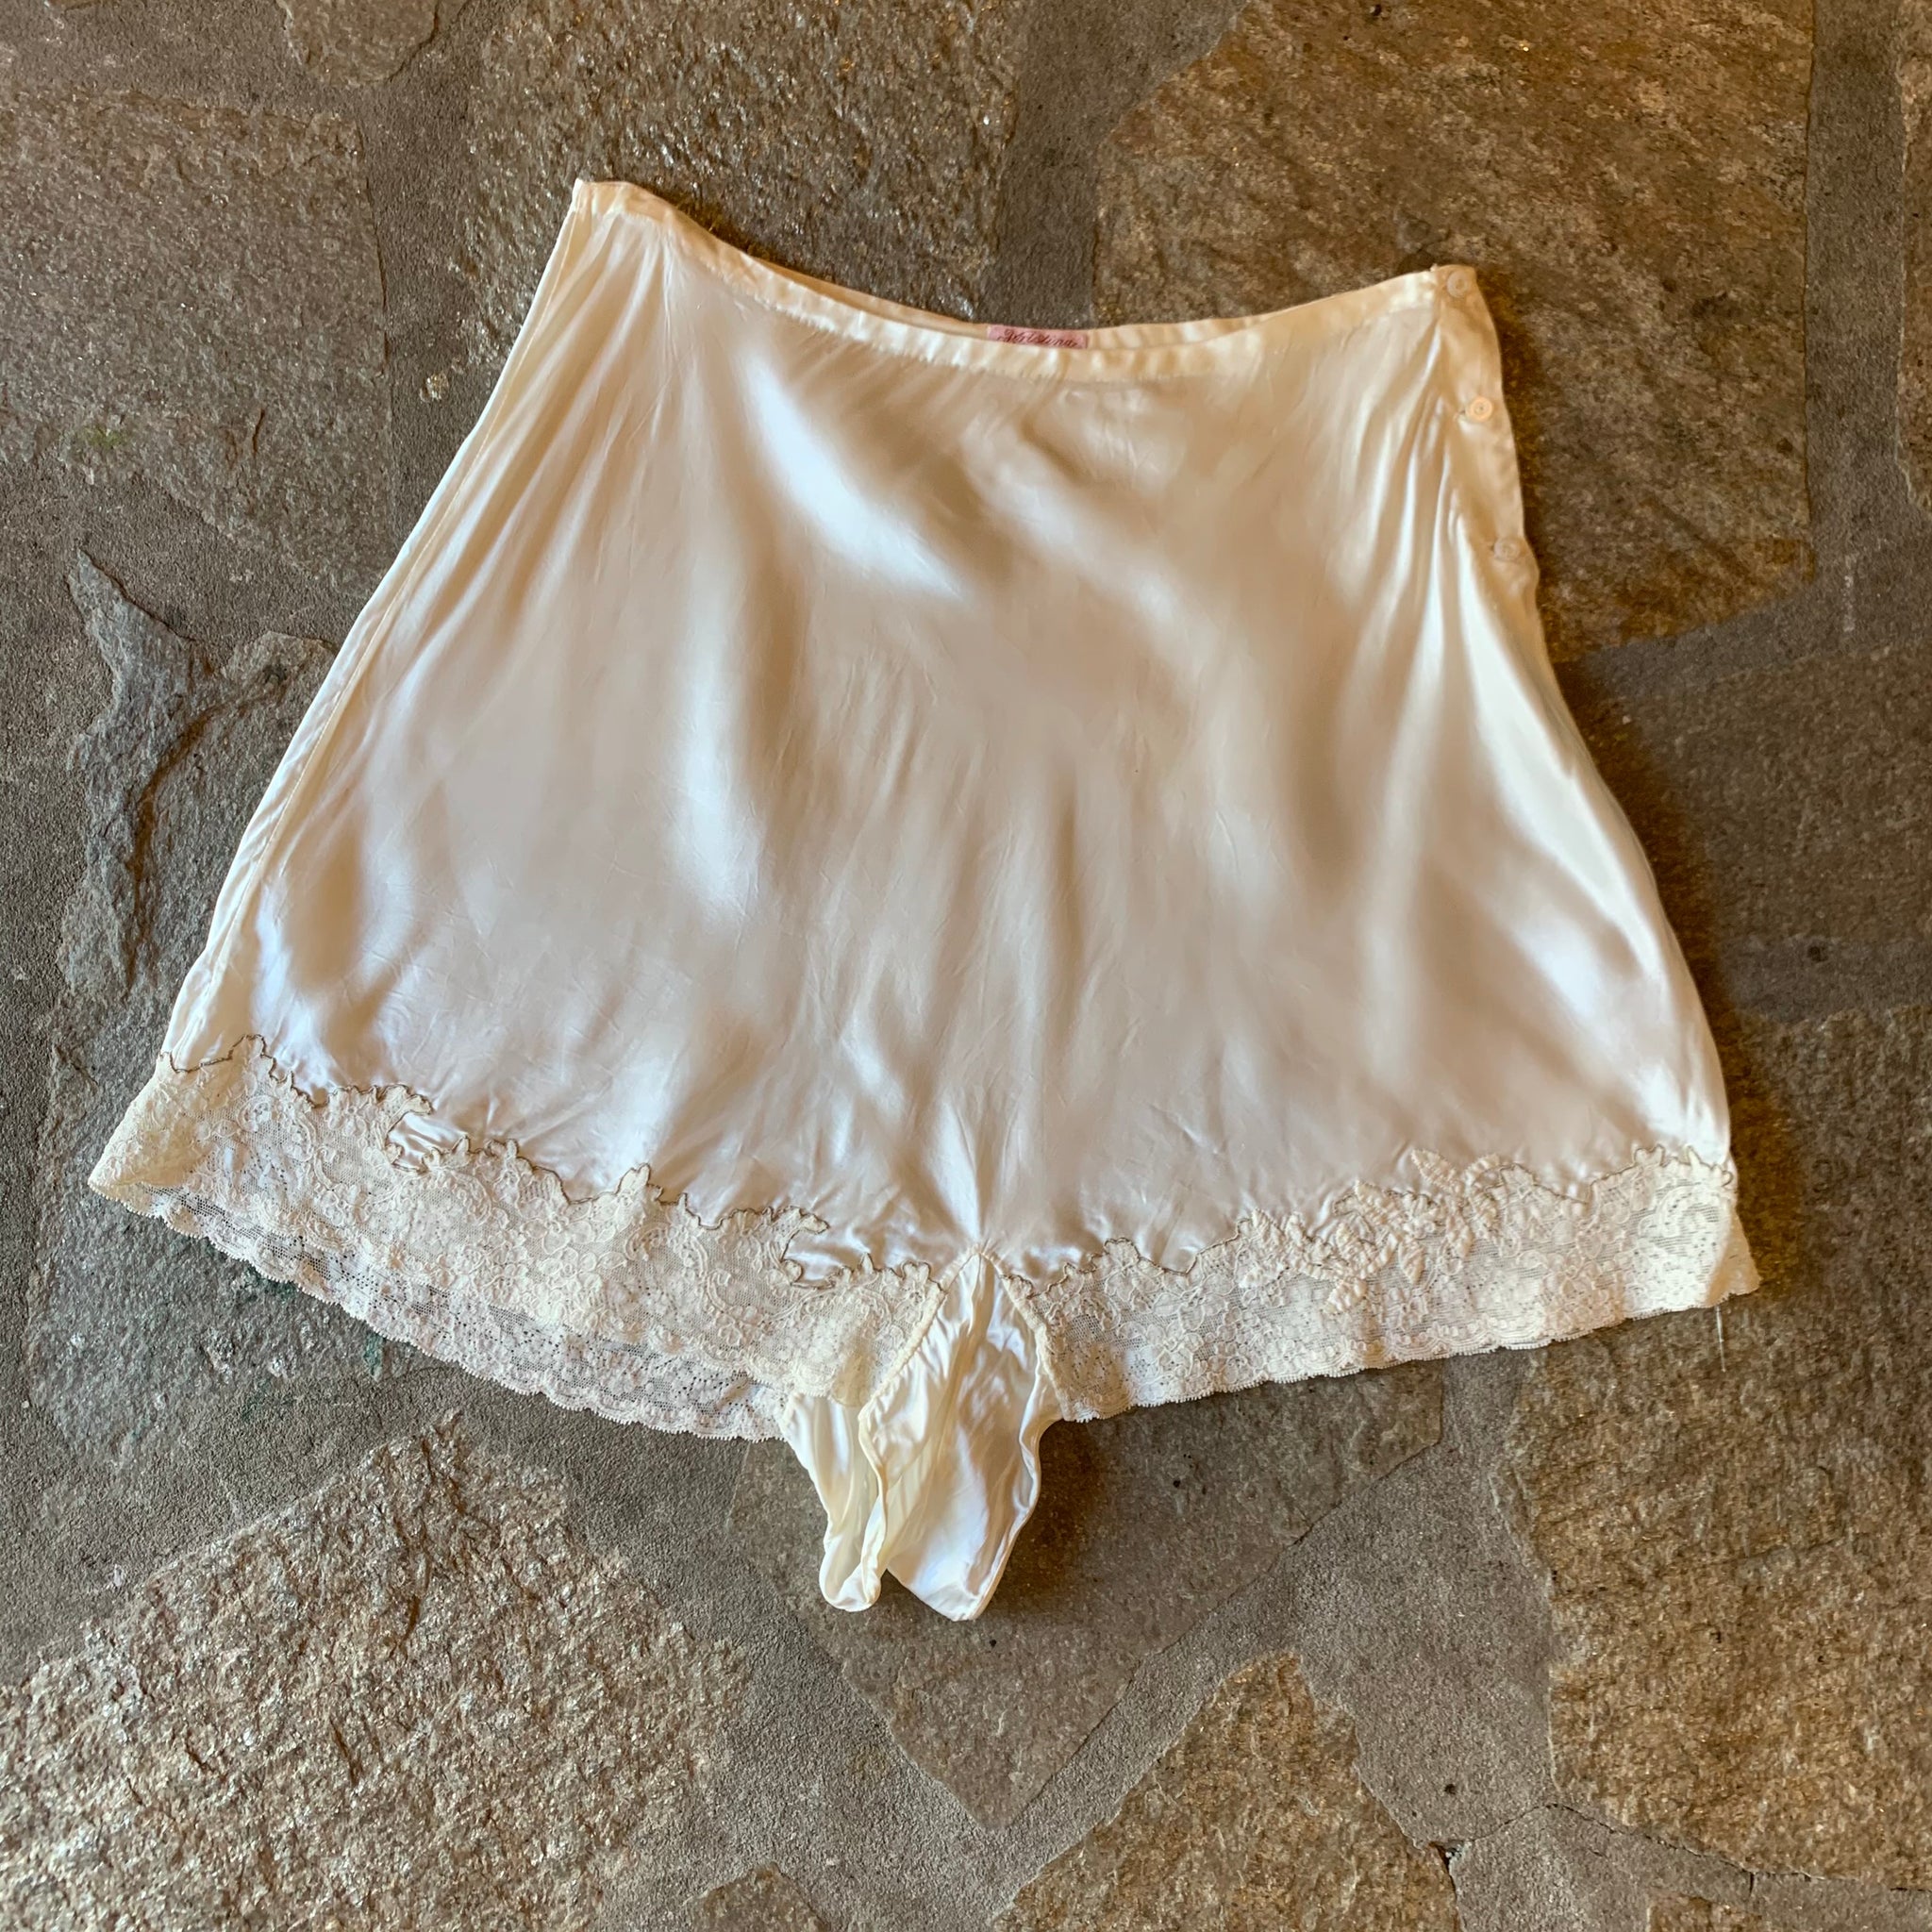 Vintage White Silky Slip Shorts with Lace Detail